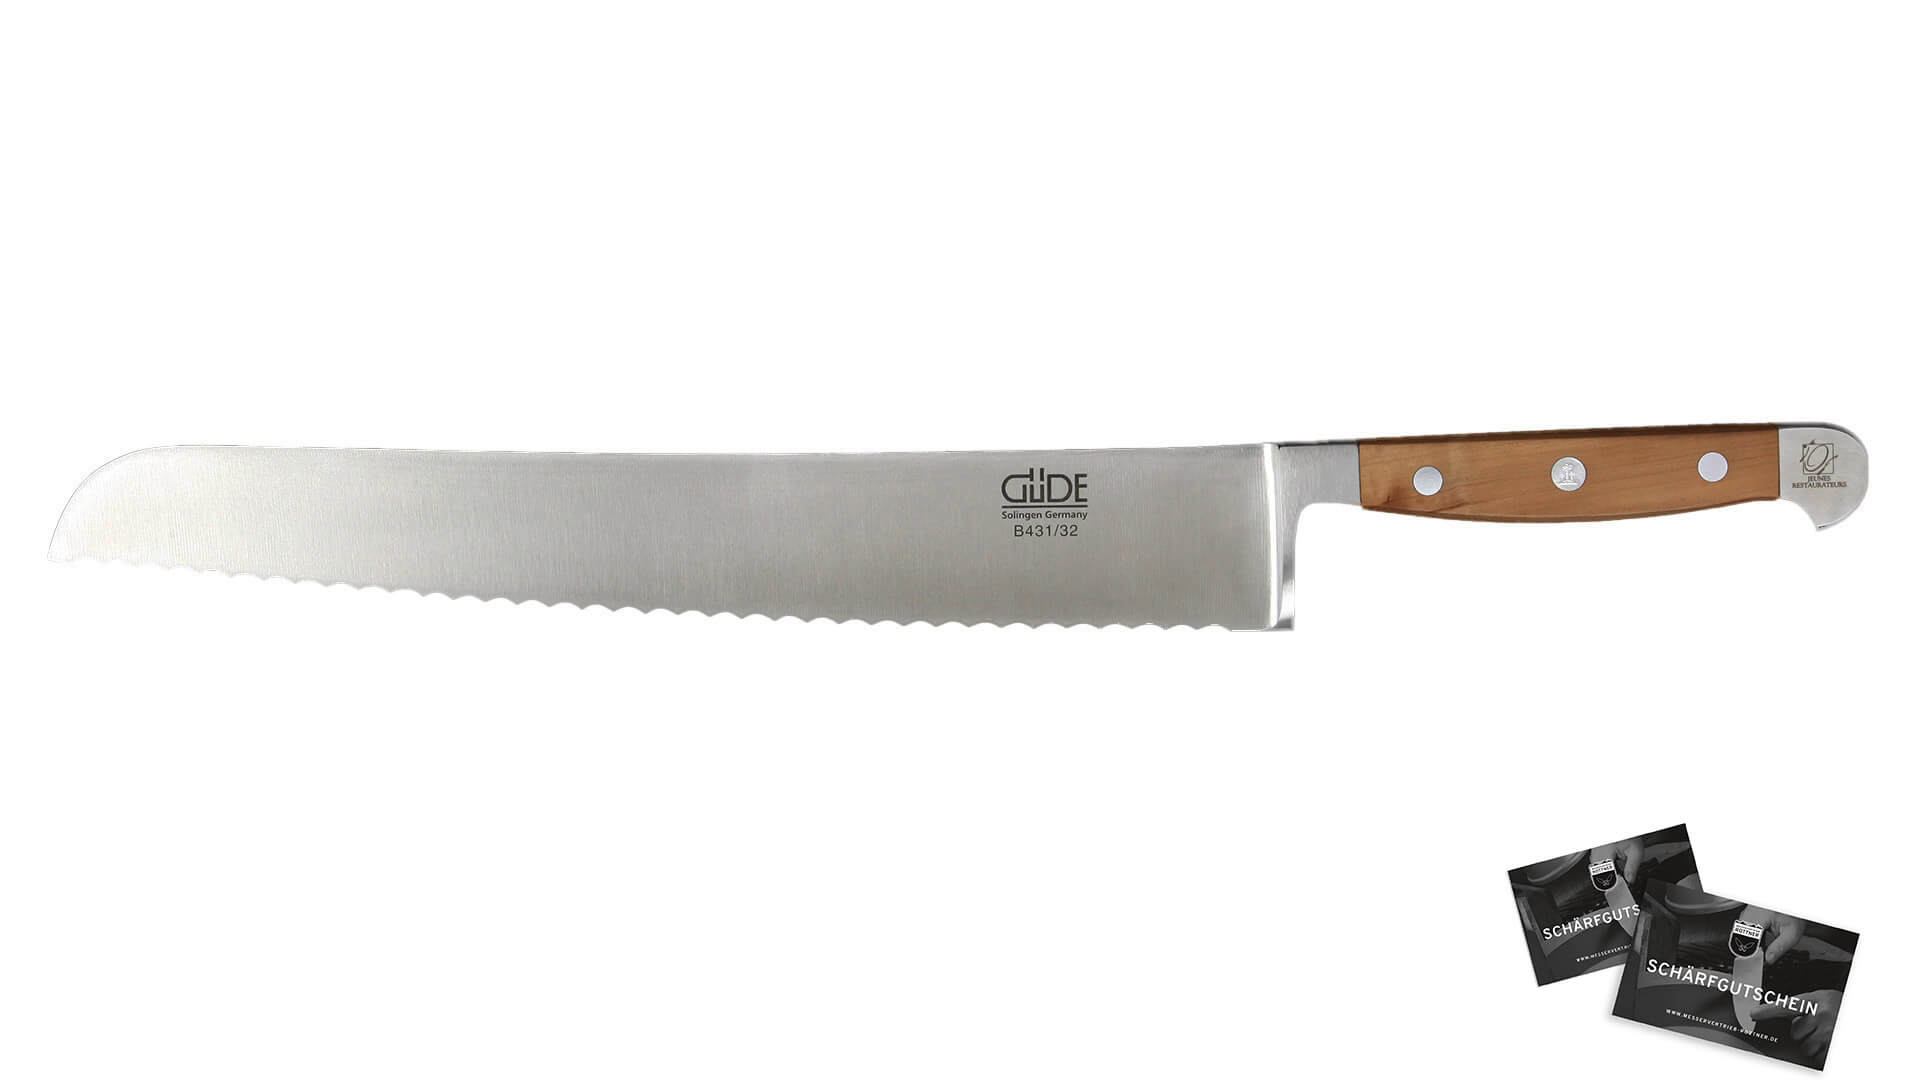 Gude Alpha Pear Tomato Knife with Pearwood Handle, 5-in